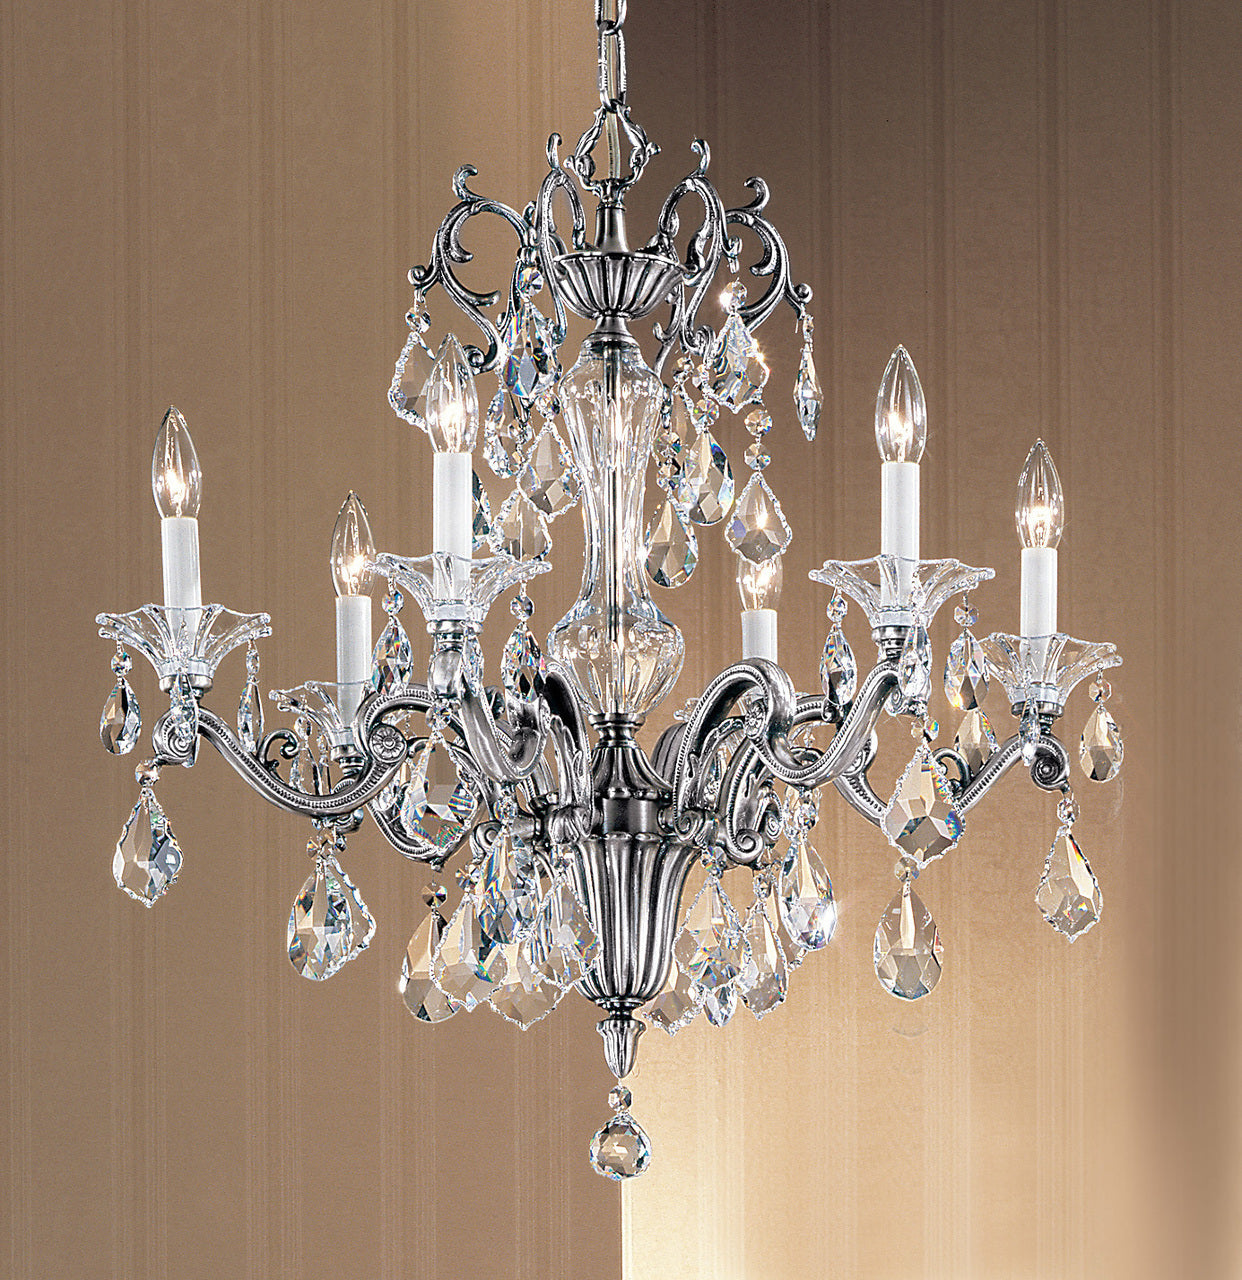 Classic Lighting 57106 MS C Via Firenze Crystal Chandelier in Millennium Silver (Imported from Spain)